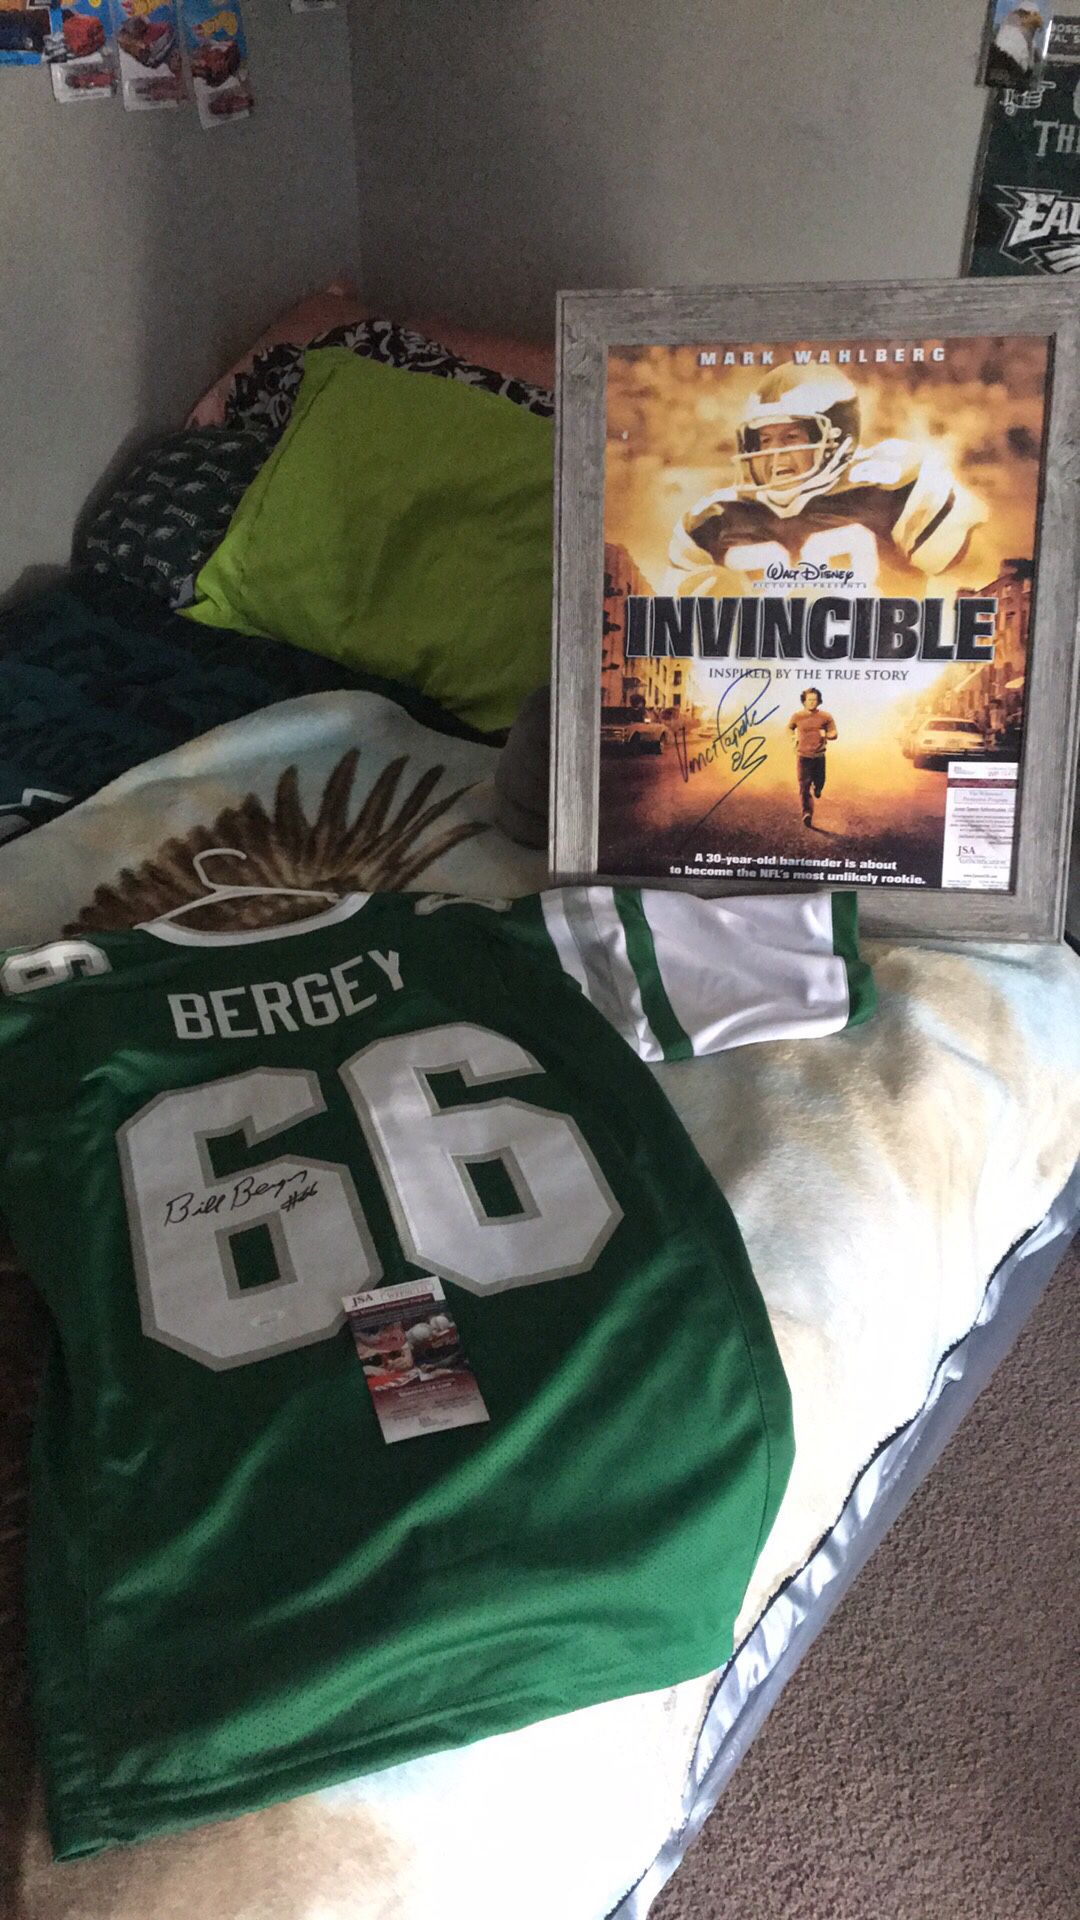 AUTOGRAPHED VINCE PAPALE INVINCIBLE MOVIE POSTER AND AN AUTOGRAPHED BILL BERGEY EAGLES JERSEY